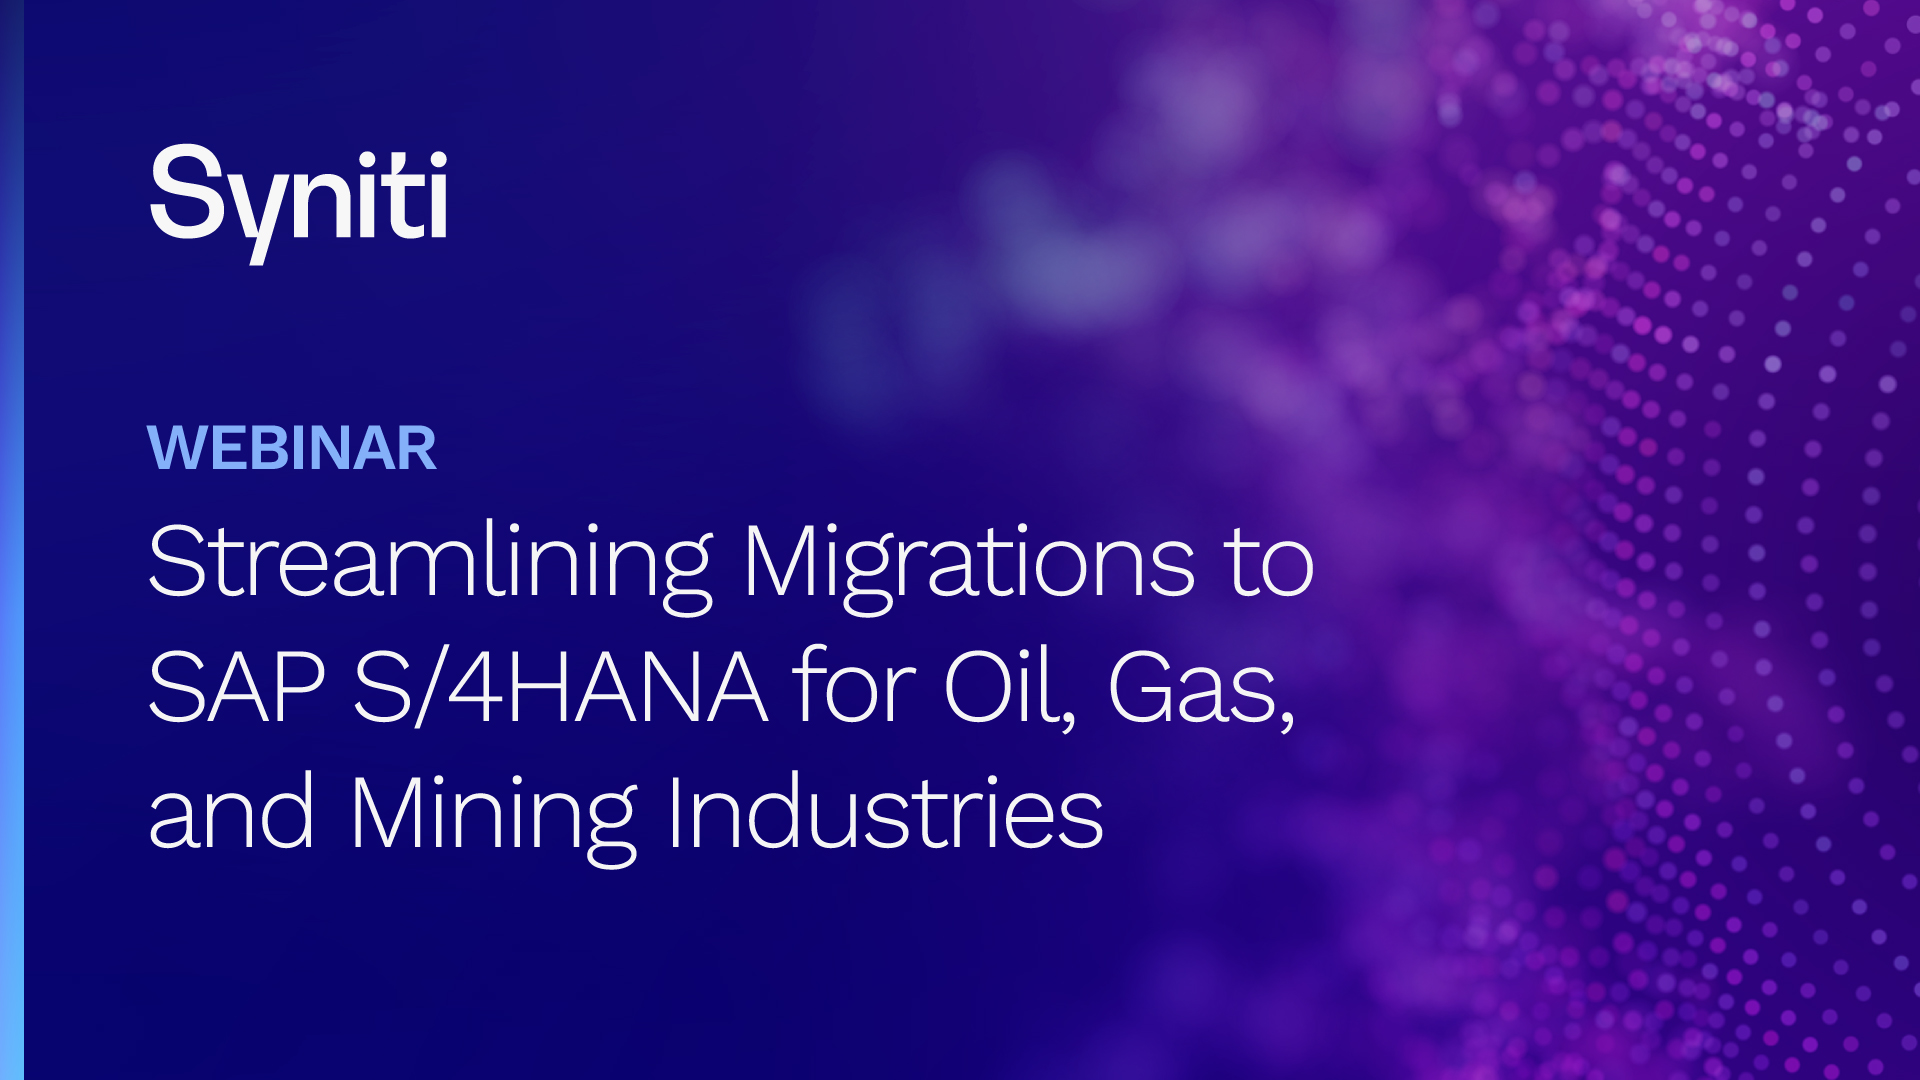 Streamlining Migrations to SAP S/4HANA for Oil, Gas, and Mining Industries